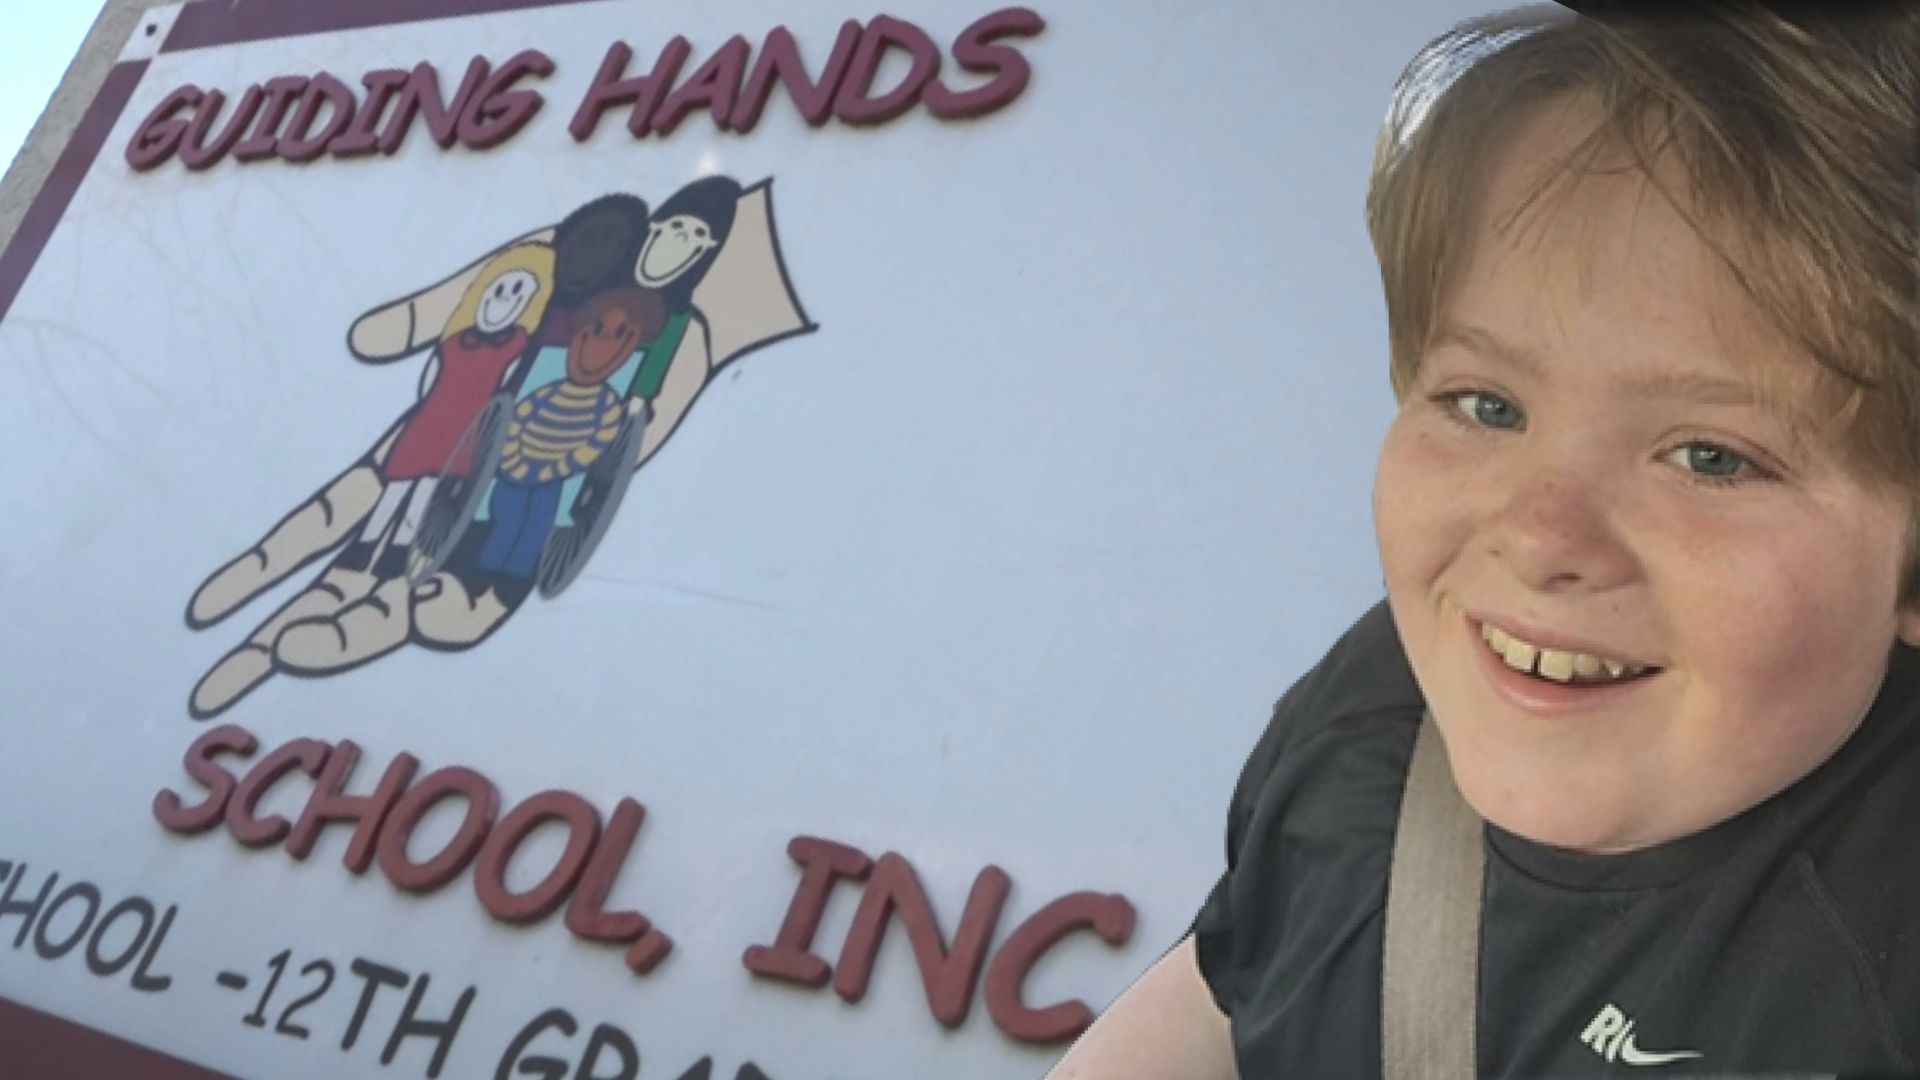 Max Benson, 13, died after being restrained at Guiding Hands School on Nov. 8.